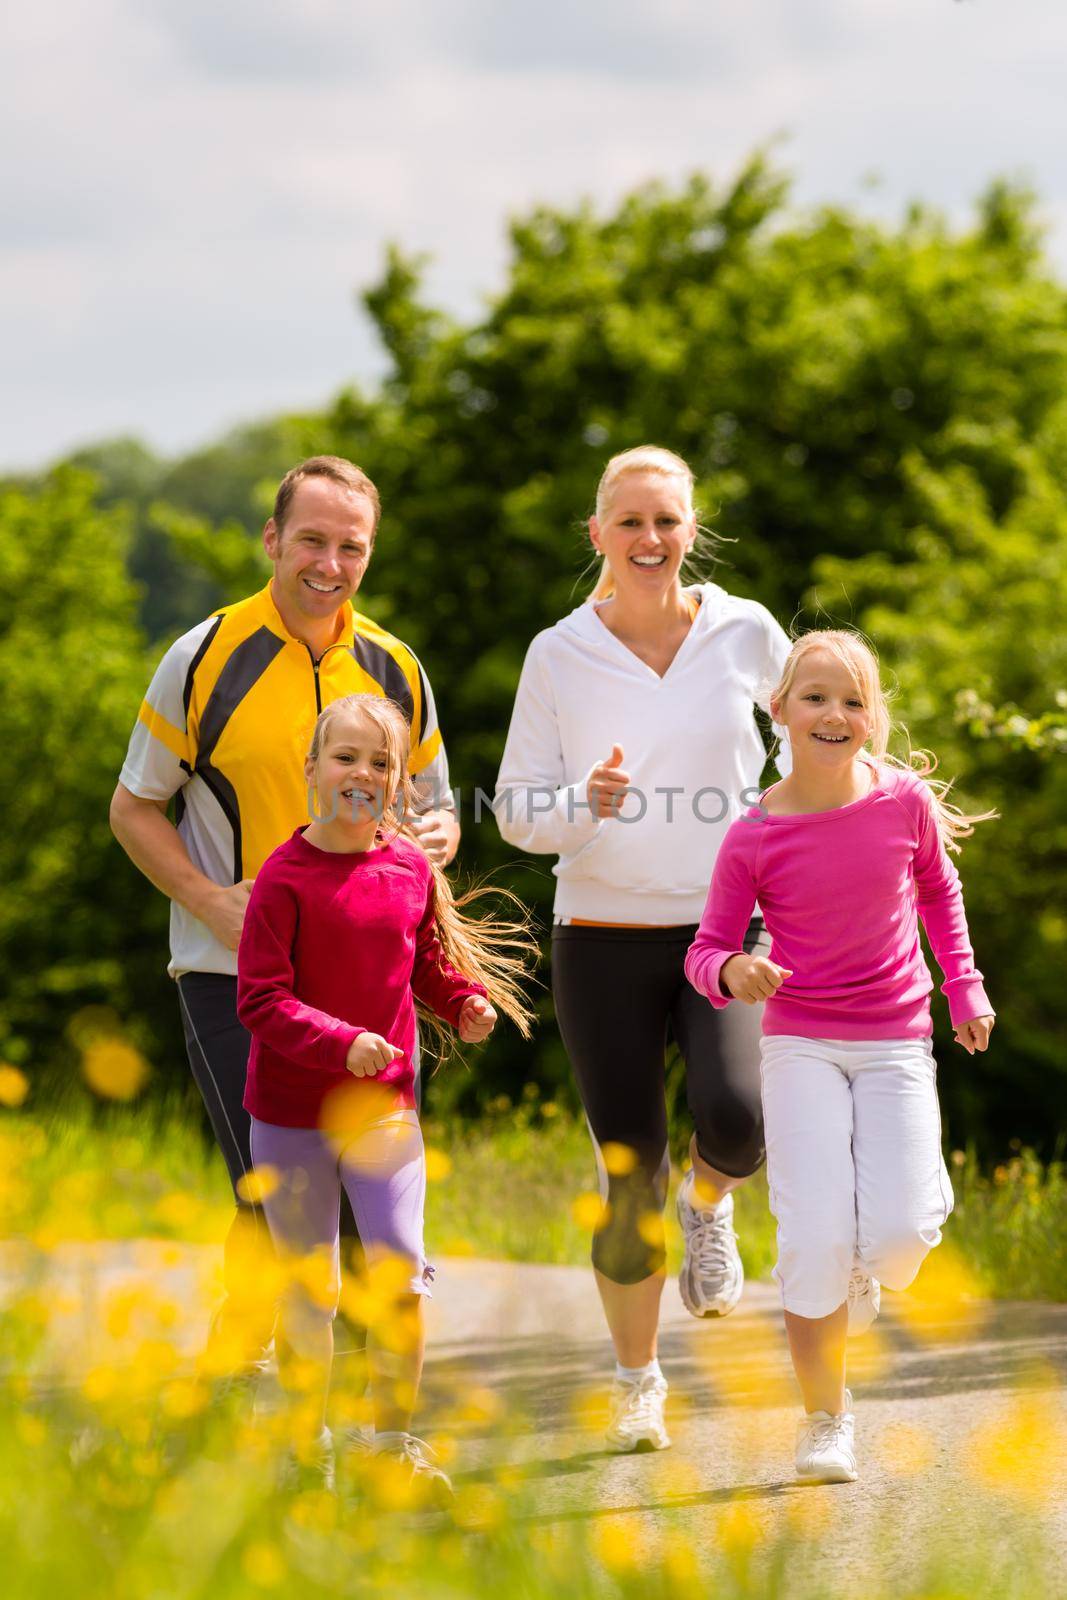 Family jogging for sport outdoors with the kids on summer day